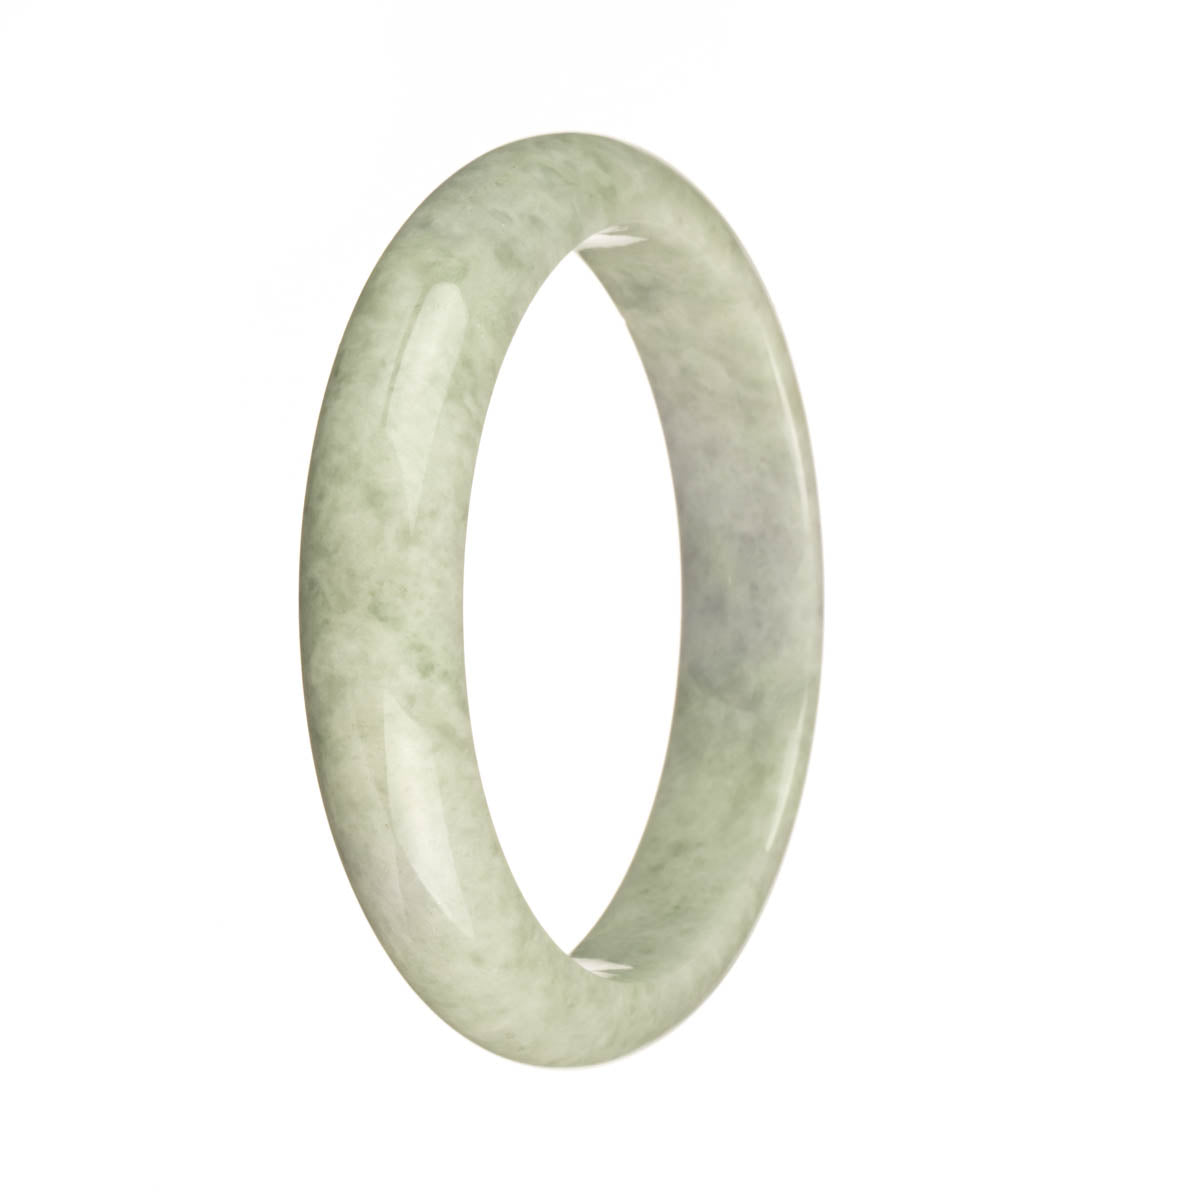 A close-up of a genuine Type A Green with Lavender Patch Traditional Jade Bracelet. The bracelet features a 59mm Half Moon shape and is sold by MAYS.